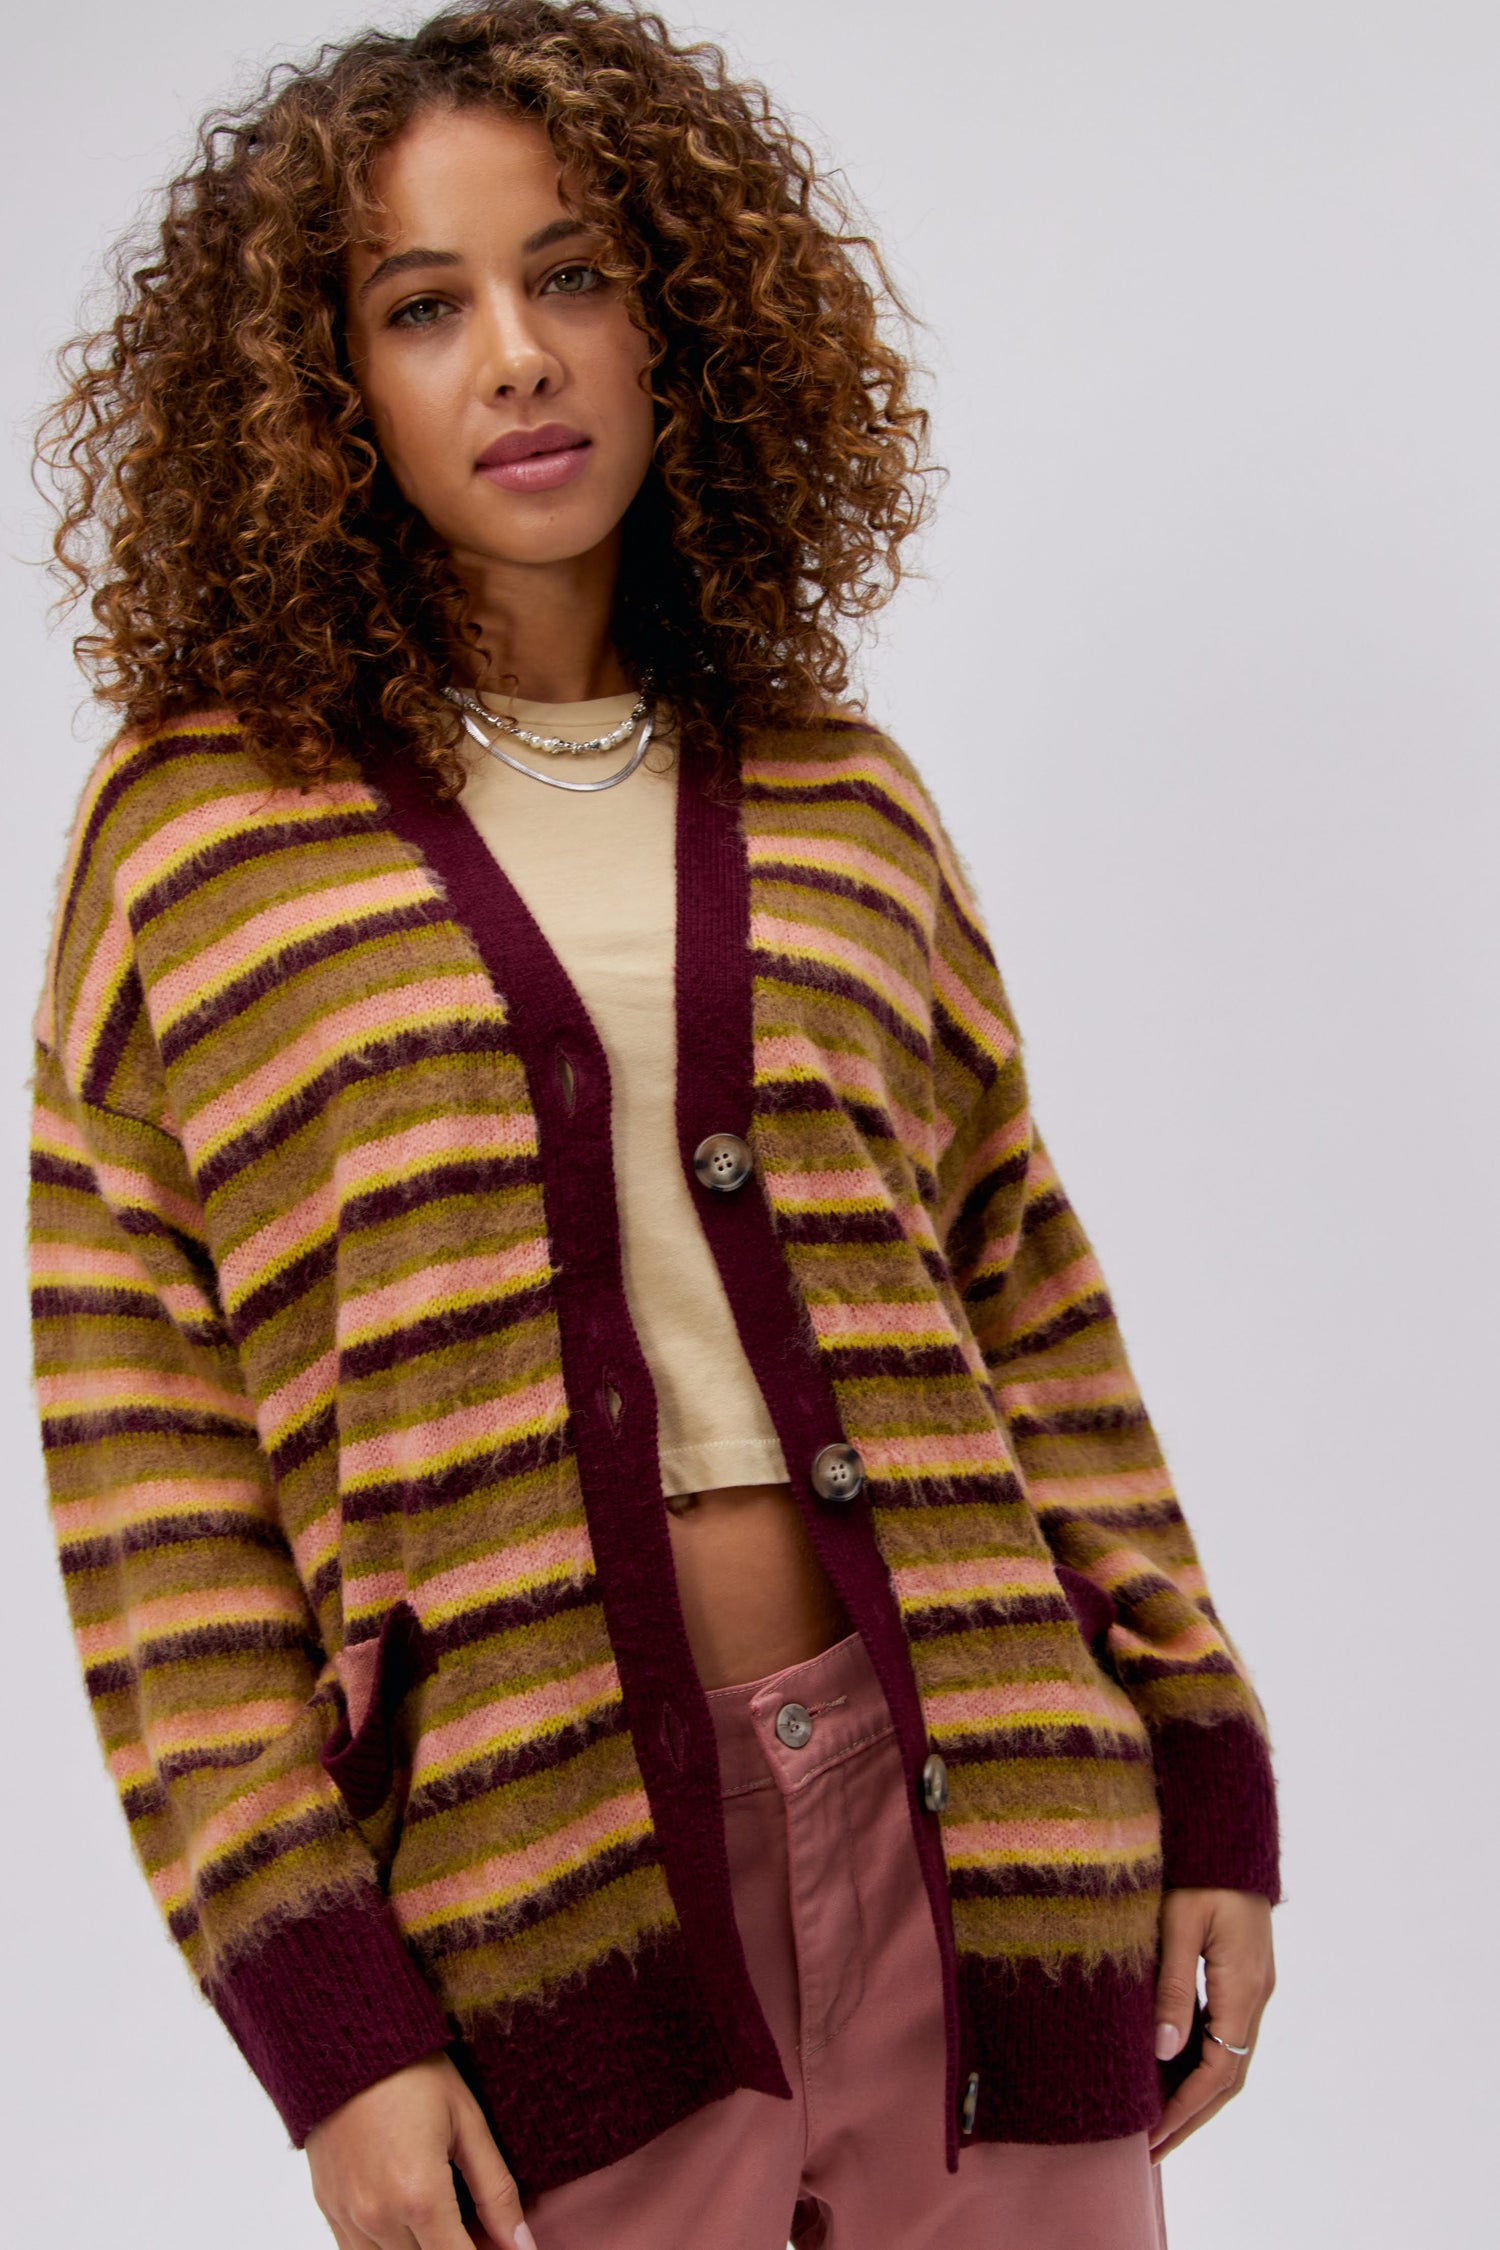 A curly-haired model featuring a cherry crush stripe cardigan.